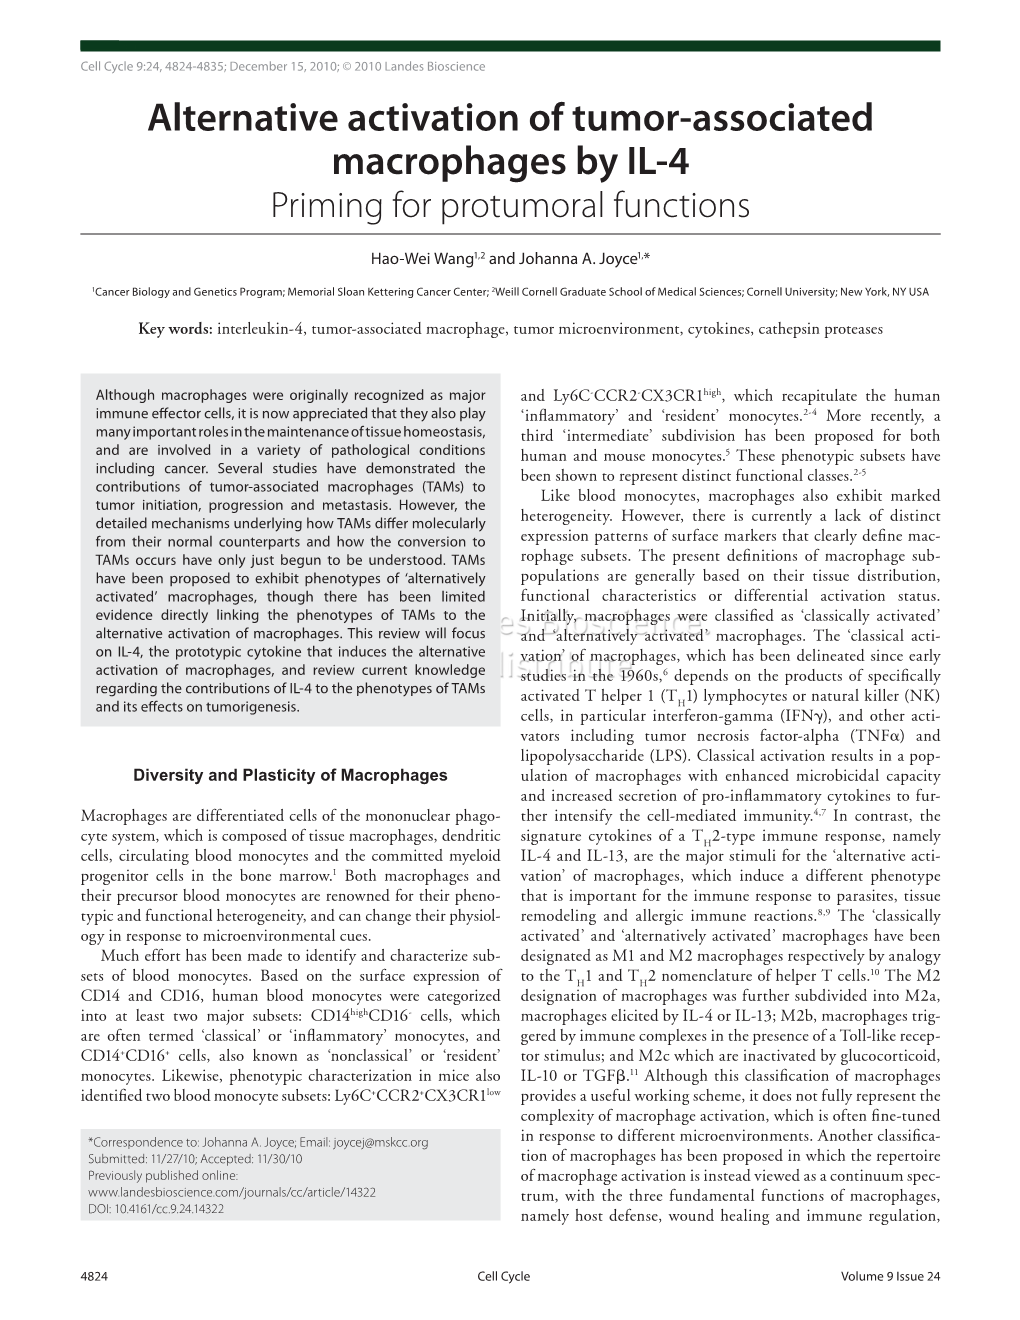 Alternative Activation of Tumor-Associated Macrophages by IL-4 Priming for Protumoral Functions